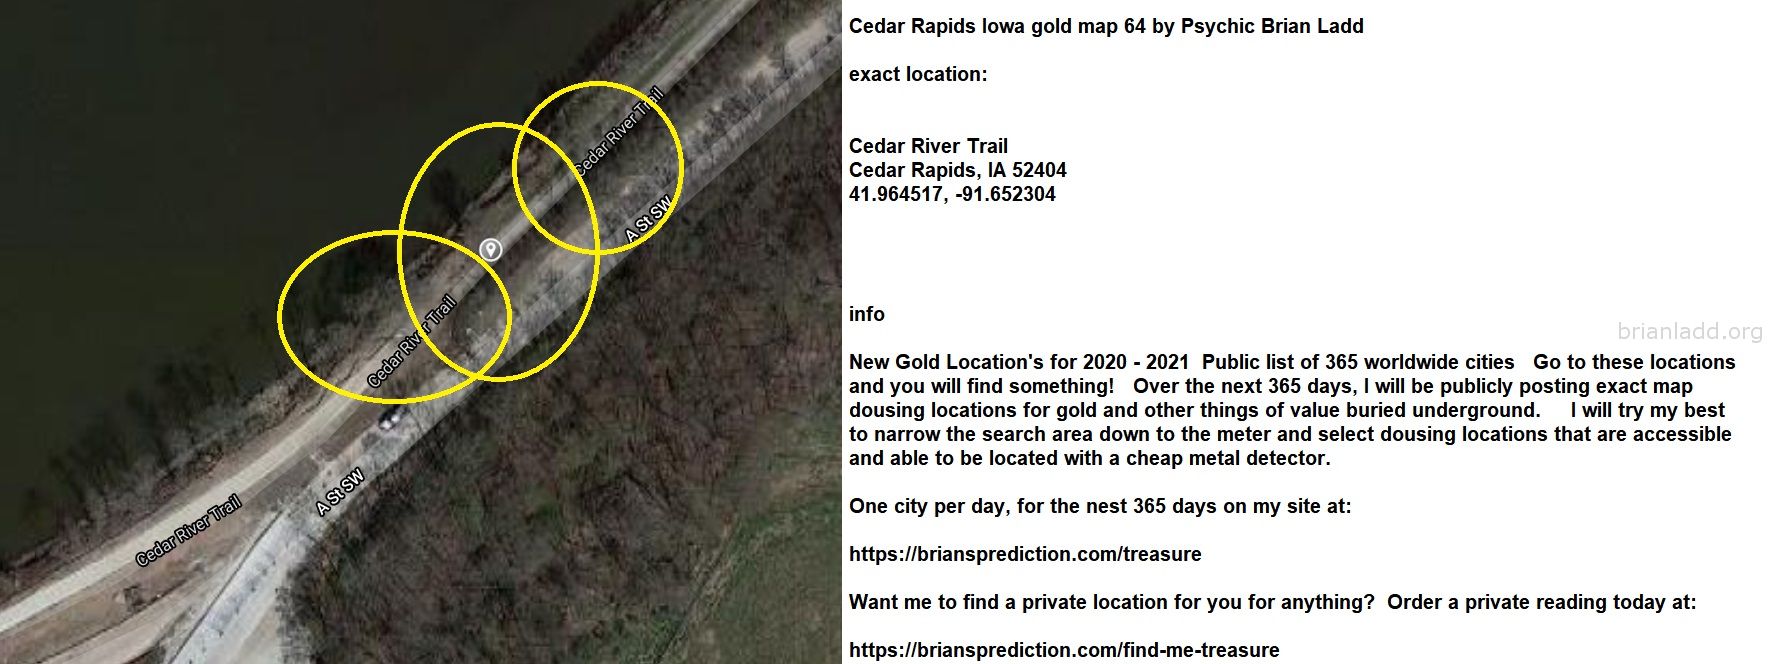 Cedar Rapids Iowa gold map 64 by Psychic Brian Ladd
New Gold Location's for 2020 - 2021  Public list of 365 worldwide cities   Go to these locations and you will find something!   Over the next 365 days, I will be publicly posting exact map dousing locations for gold and other things of value buried underground.     I will try my best to narrow the search area down to the meter and select dousing locations that are accessible and able to be located with a cheap metal detector. One city per day, for the nest 365 days on my site at:  https://briansprediction.com/treasure  Want me to find a private location for you for anything?  Order a private reading today at:  https://briansprediction.com/find-me-treasure
